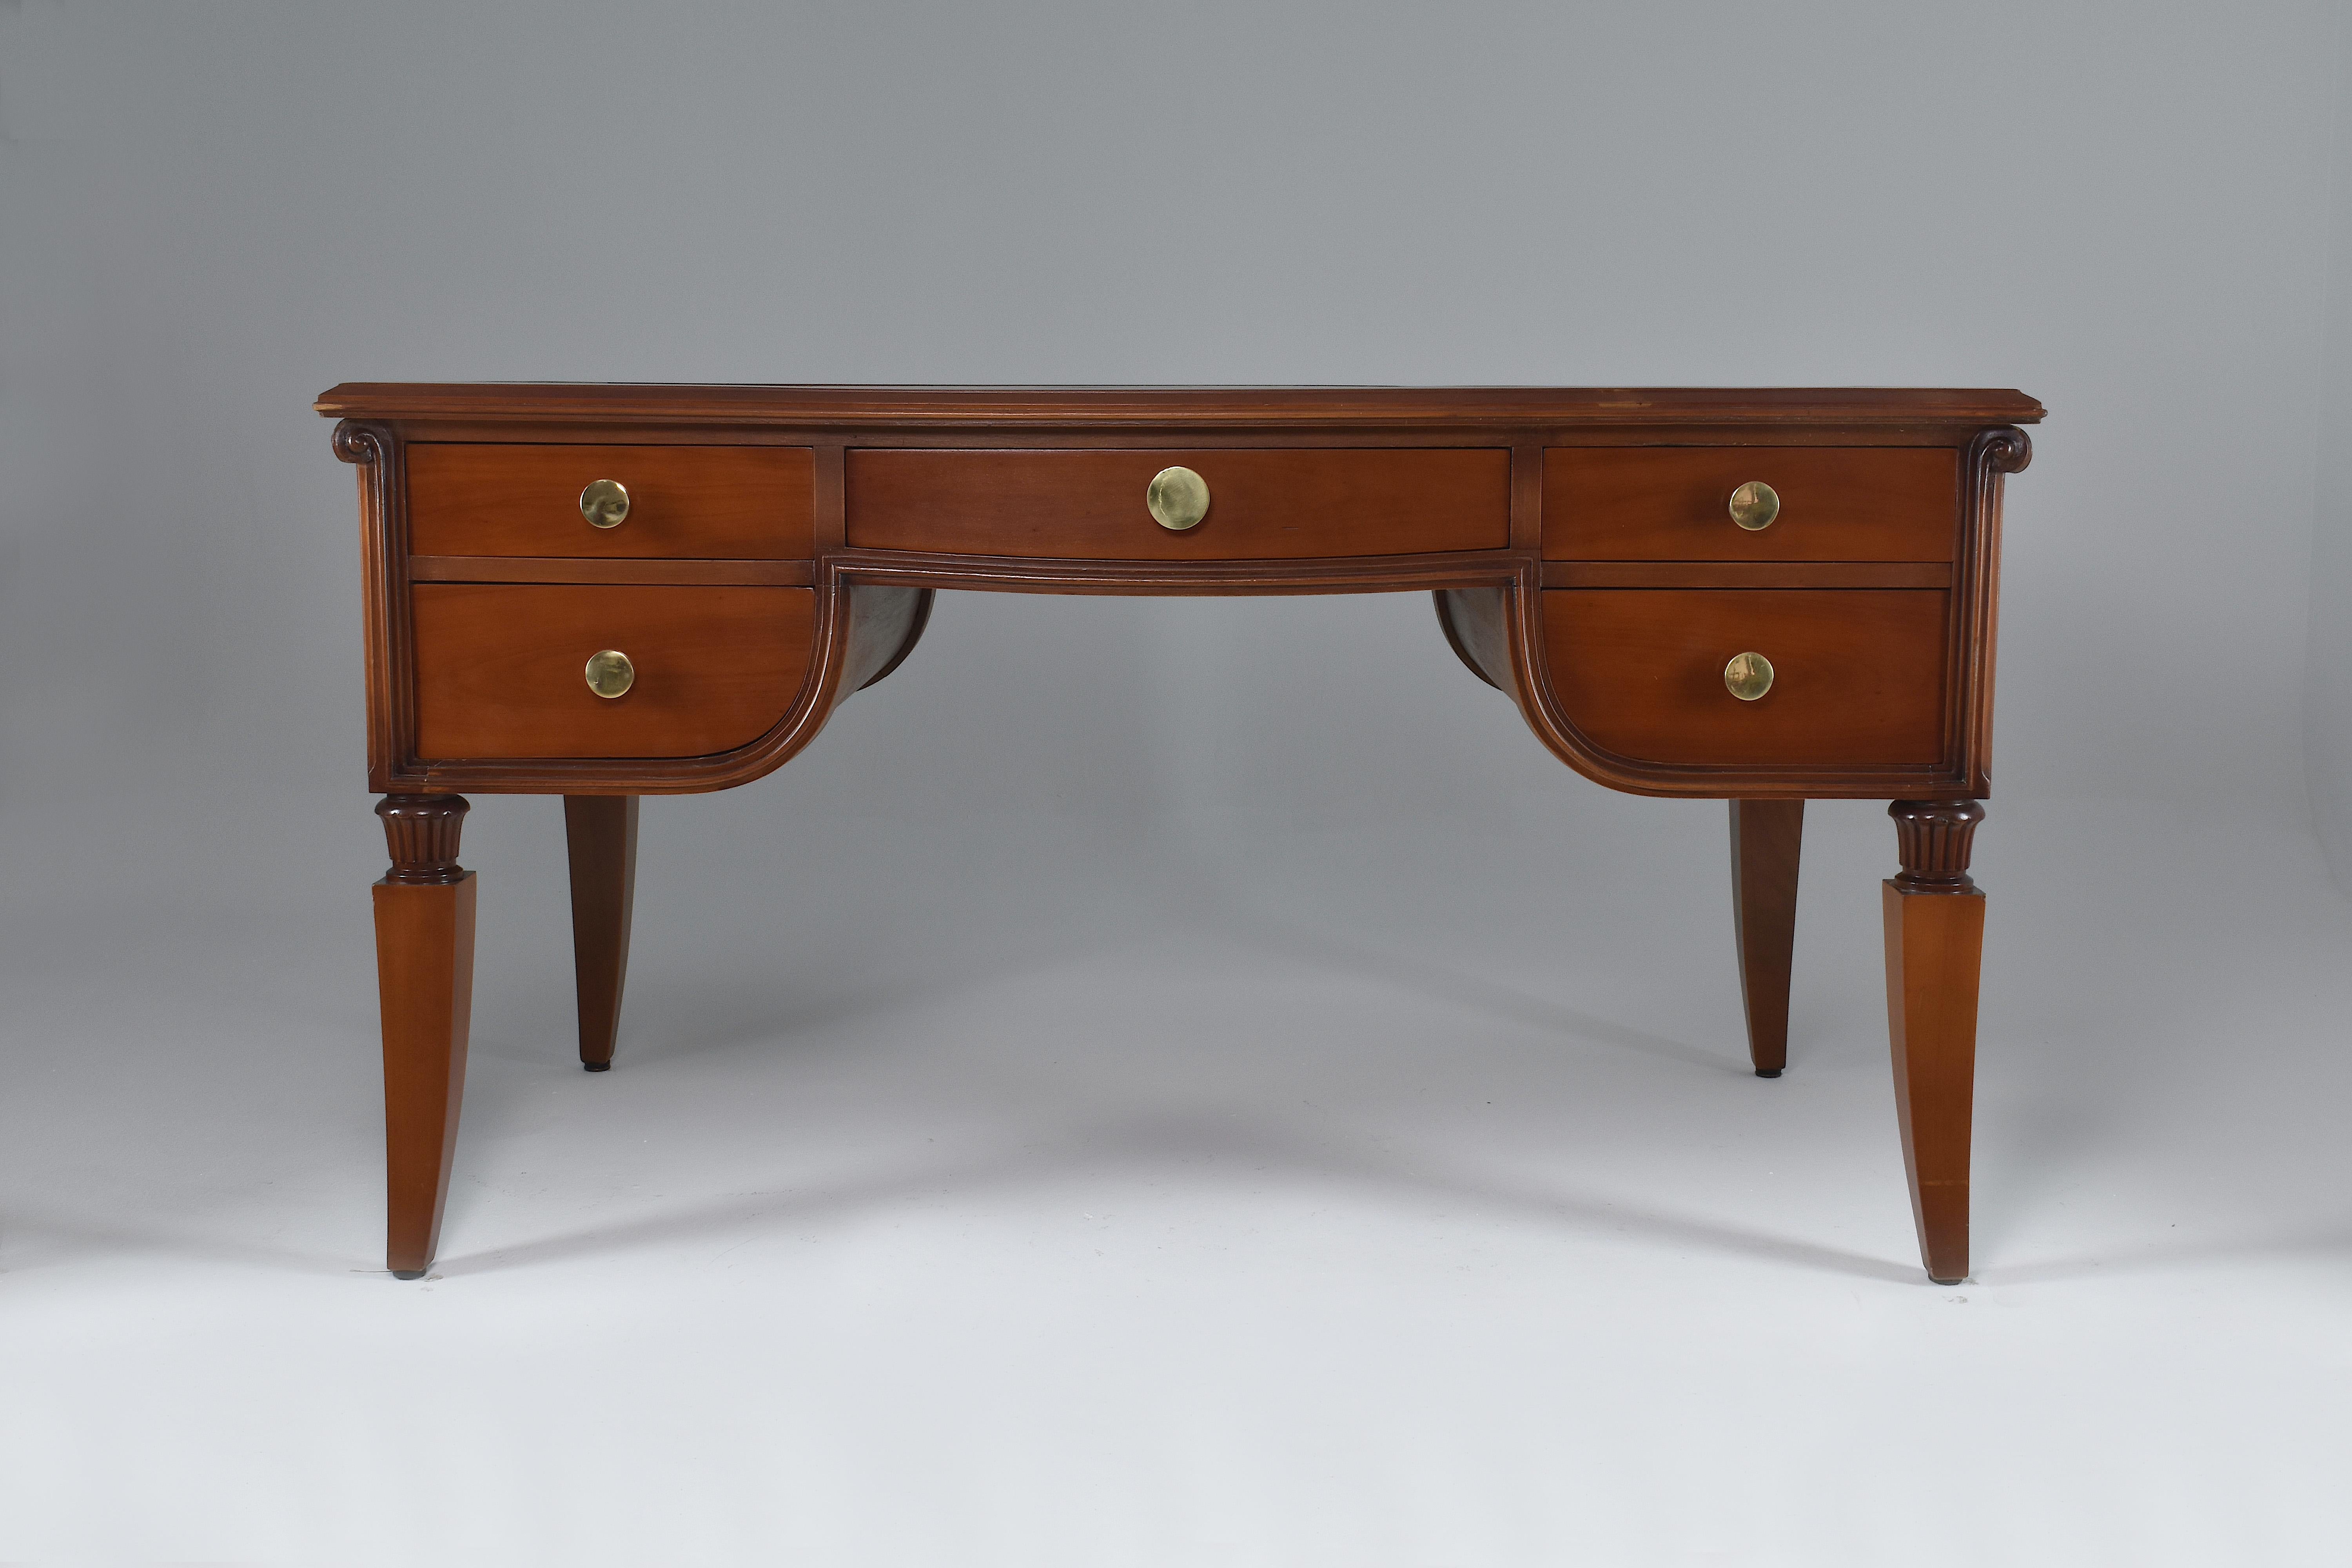 A majestic 20th-century French vintage office desk with beautiful sculpted neo-classical style details and big brass handles. This desk is composed of one central drawer and two additional drawers on each side. The leather 
France. 1940's